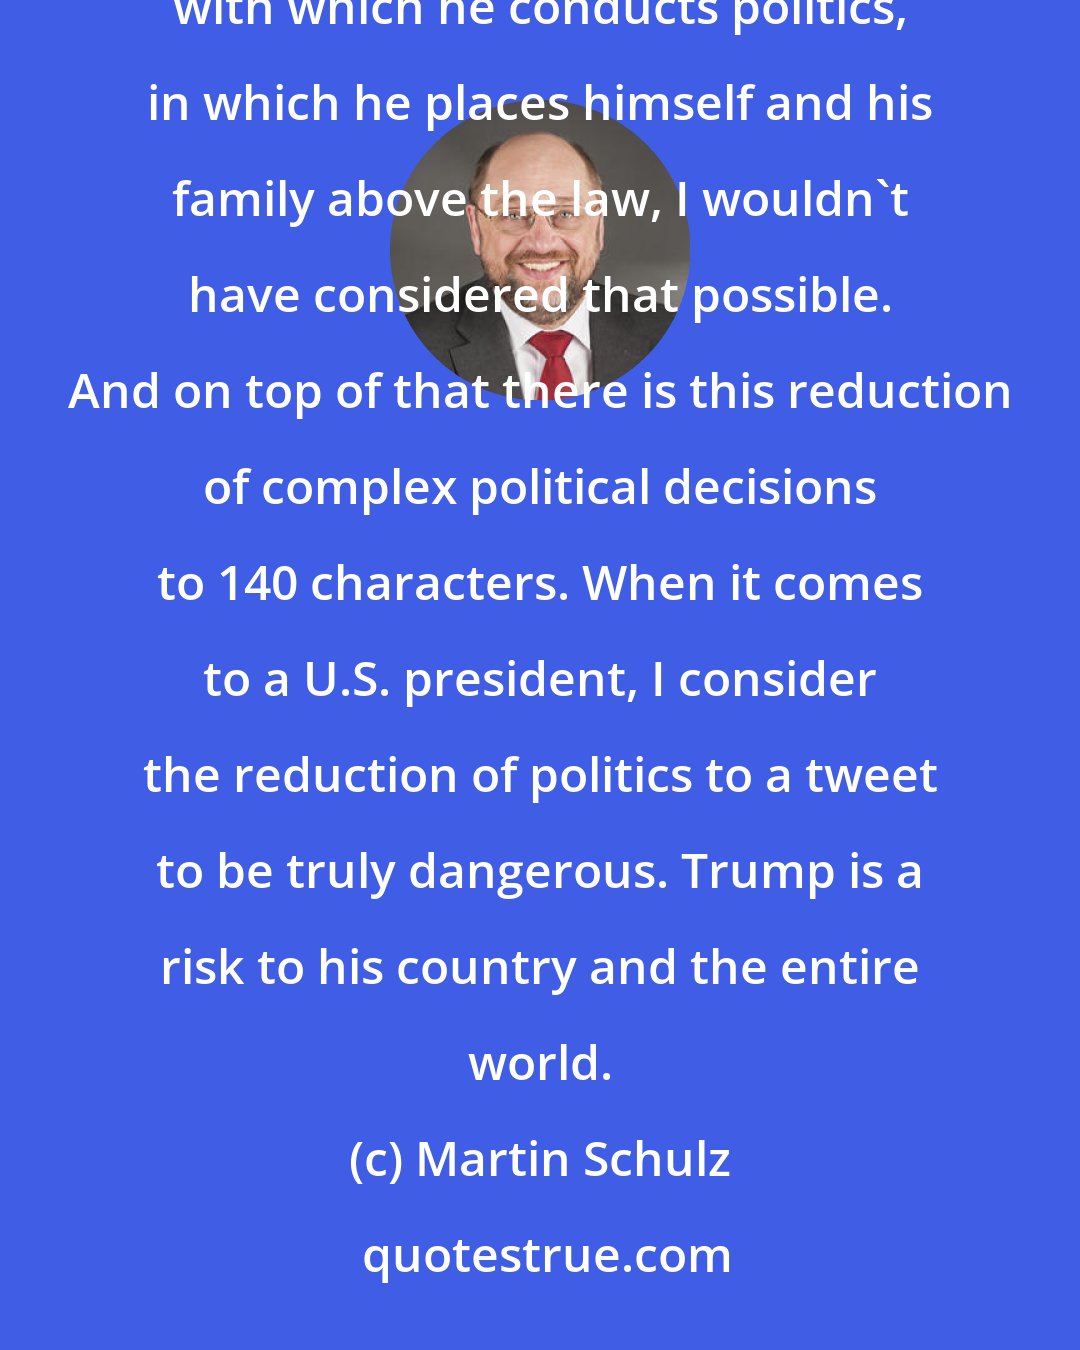 Martin Schulz: It was clear to me that the White House's solemn atmosphere would not civilize Trump. But the merciless nepotism with which he conducts politics, in which he places himself and his family above the law, I wouldn't have considered that possible. And on top of that there is this reduction of complex political decisions to 140 characters. When it comes to a U.S. president, I consider the reduction of politics to a tweet to be truly dangerous. Trump is a risk to his country and the entire world.